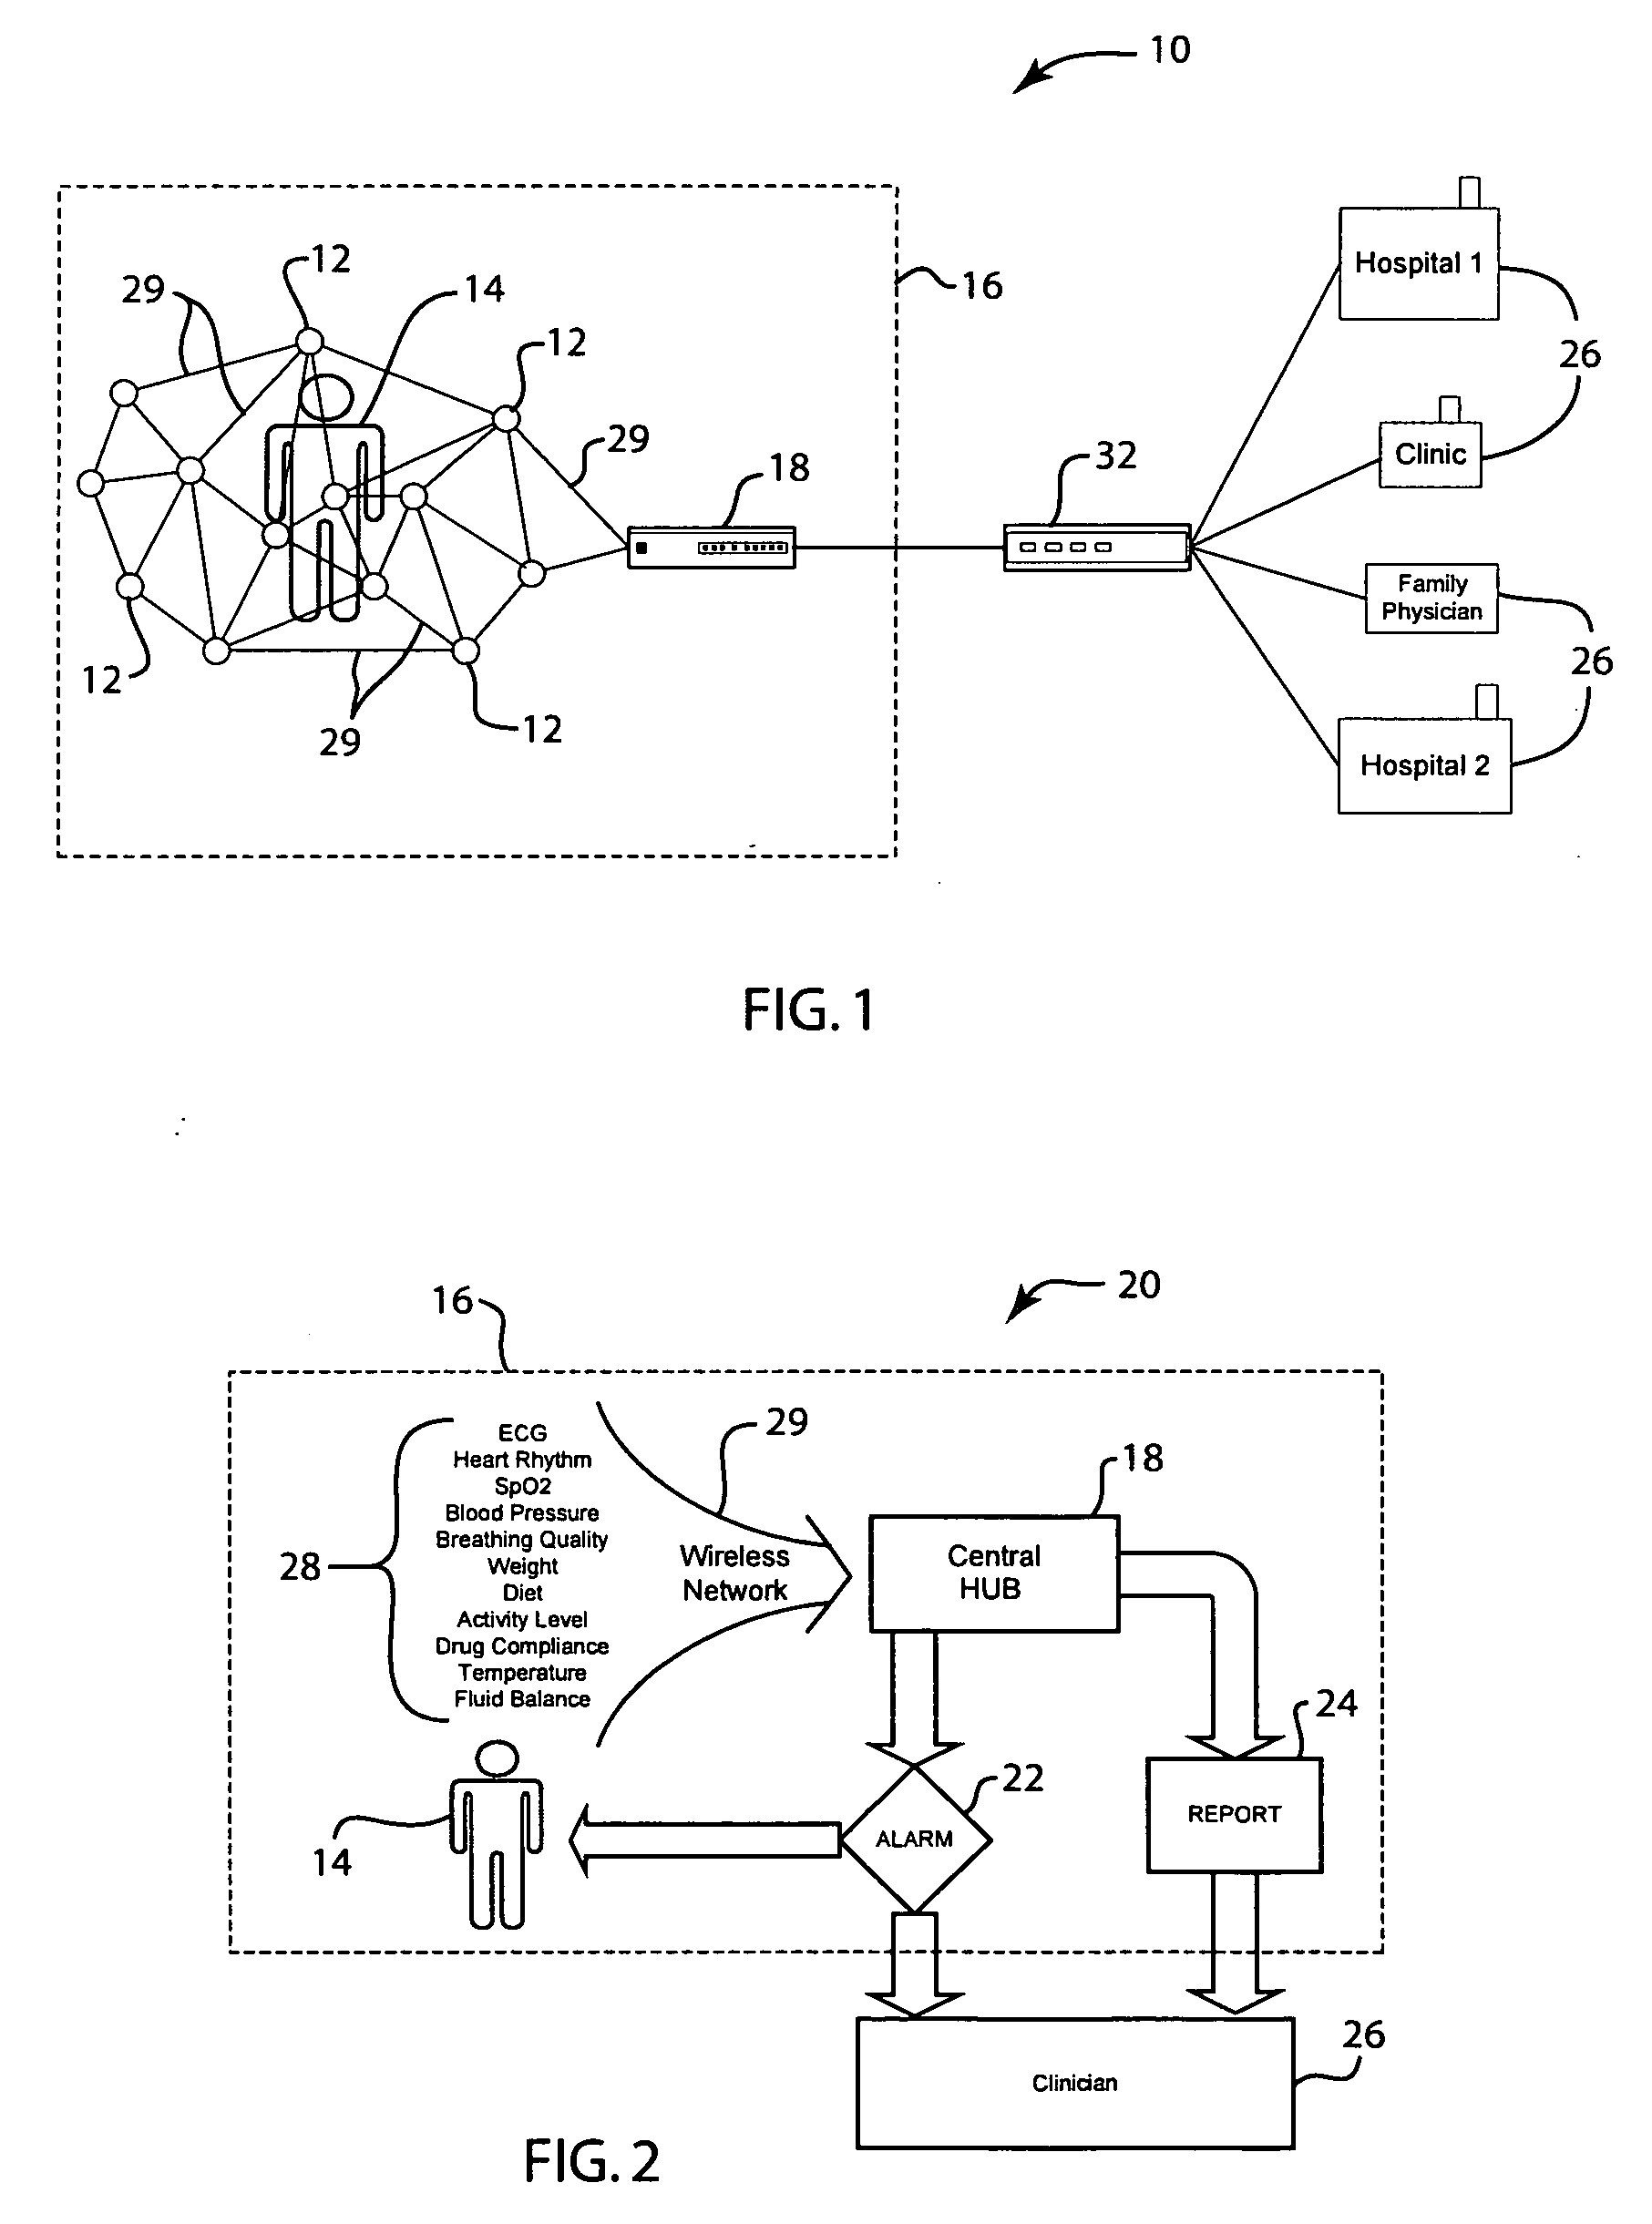 Networked modular and remotely configurable system and method of remotely monitoring patient healthcare characteristics